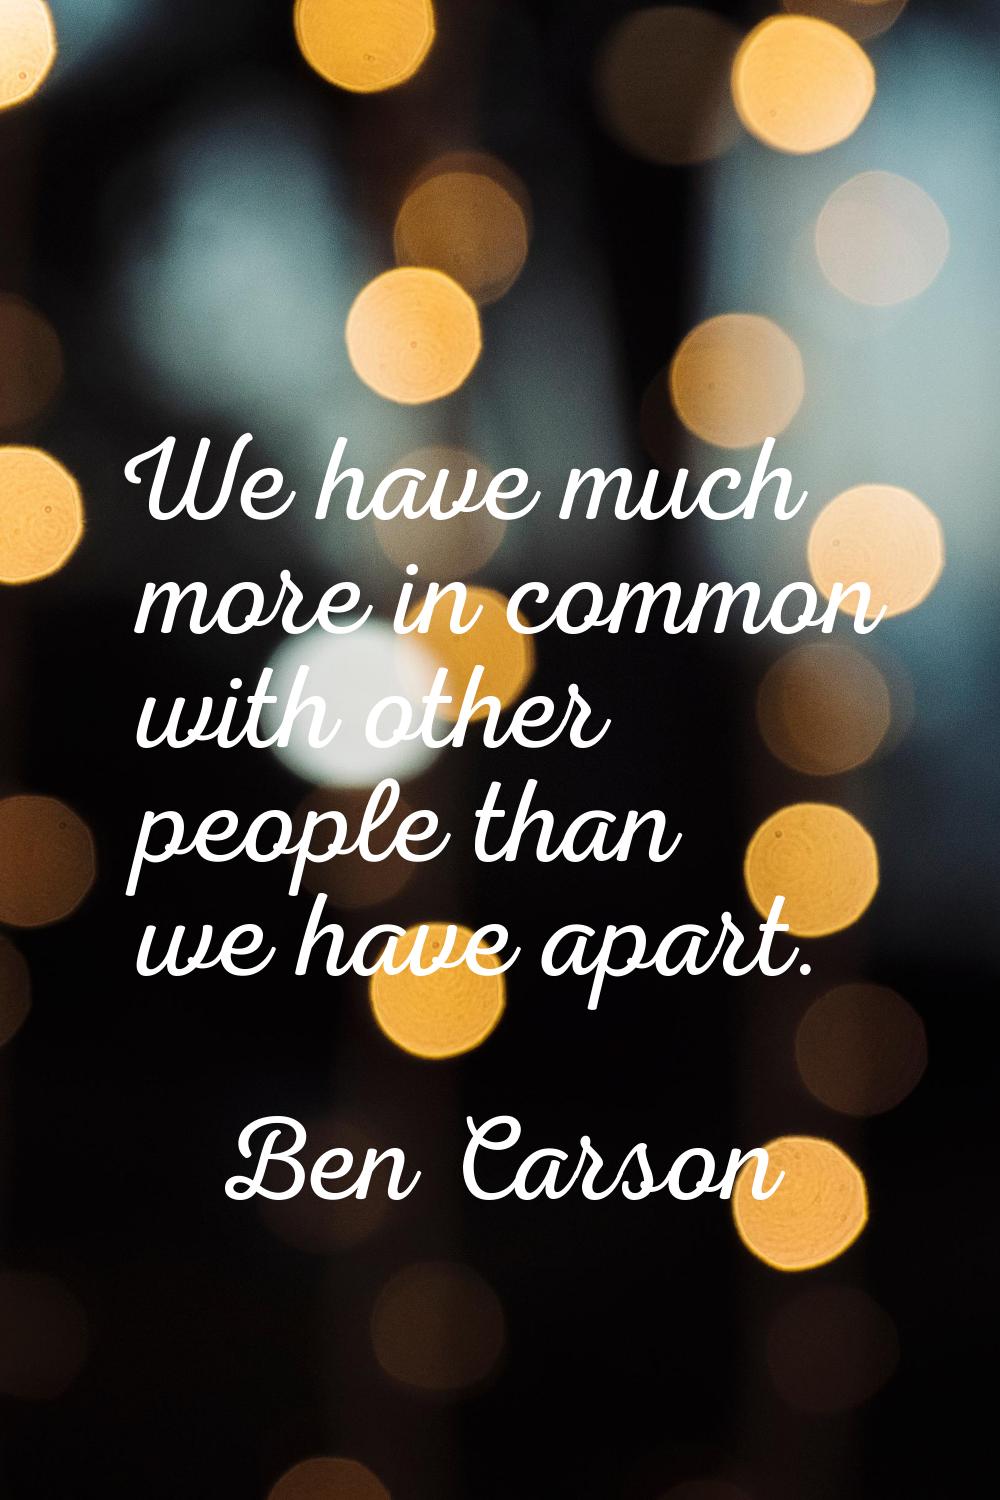 We have much more in common with other people than we have apart.